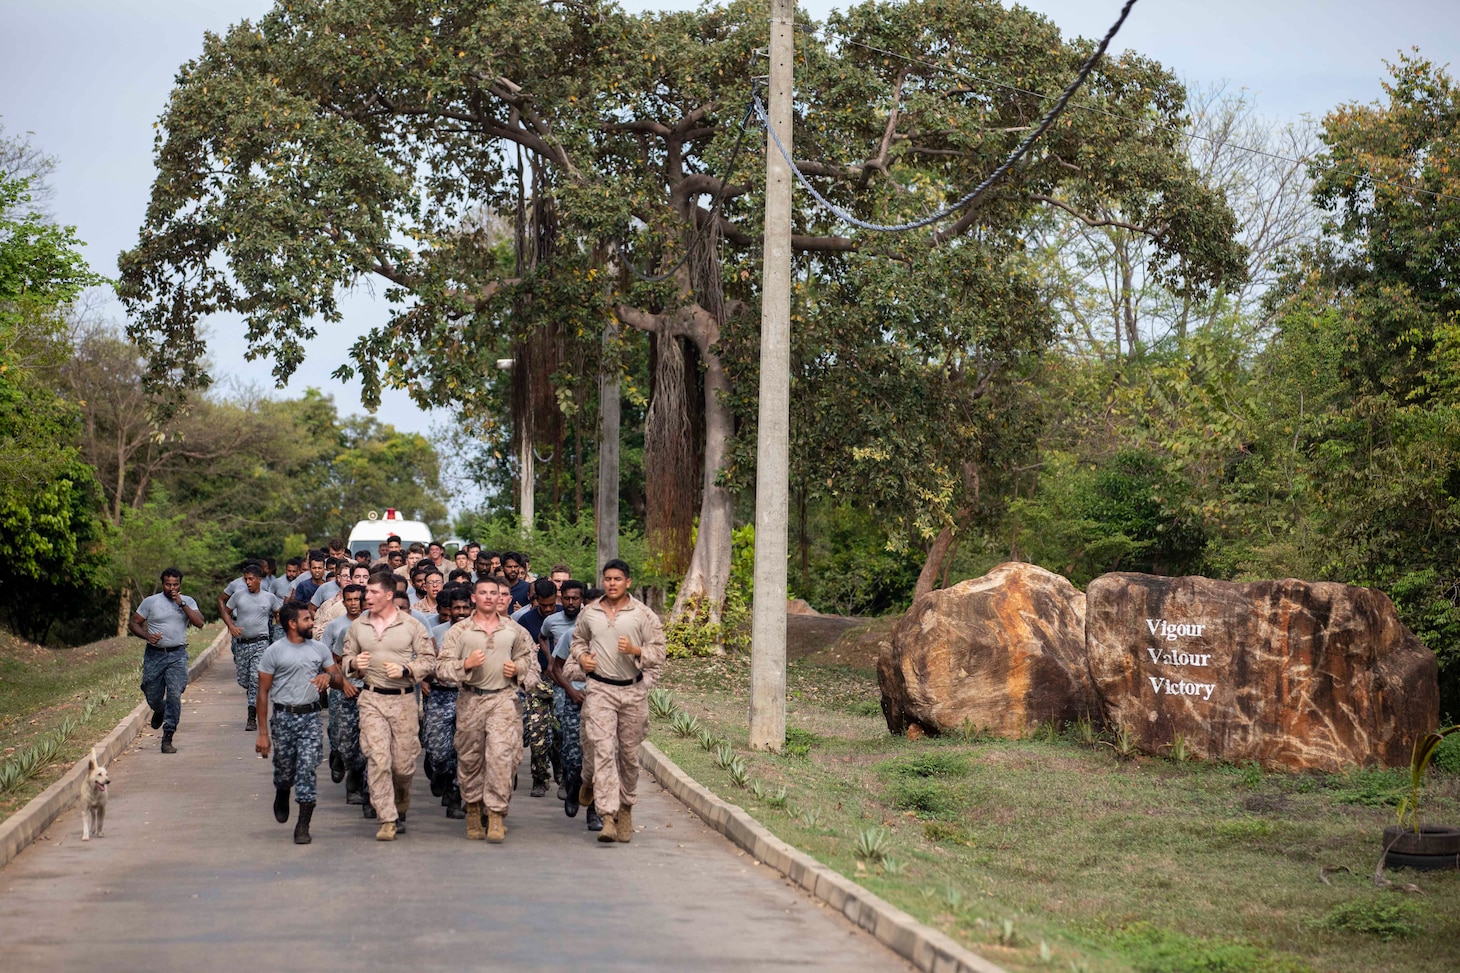 U.S. Marines assigned to Fleet Anti-Terrorism Security Team Pacific and members of the Sri Lanka Navy (SLN) take part in a formation run as part of exercise Cooperation Afloat Readiness and Training (CARAT) Sri Lanka 2024 at SLNS Vidura, April 23. CARAT Sri Lanka is a bilateral exercise between Sri Lanka and the United States designed to promote regional security cooperation and strengthen maritime understanding, partnerships, and interoperability. In its 29th year, the CARAT series is comprised of multinational exercises, designed to enhance U.S. and partner forces’ abilities to operate together in response to traditional and non-traditional maritime security challenges in the Indo-Pacific region. (U.S. Navy photo by Mass Communication Specialist 1st Class Charles Oki)